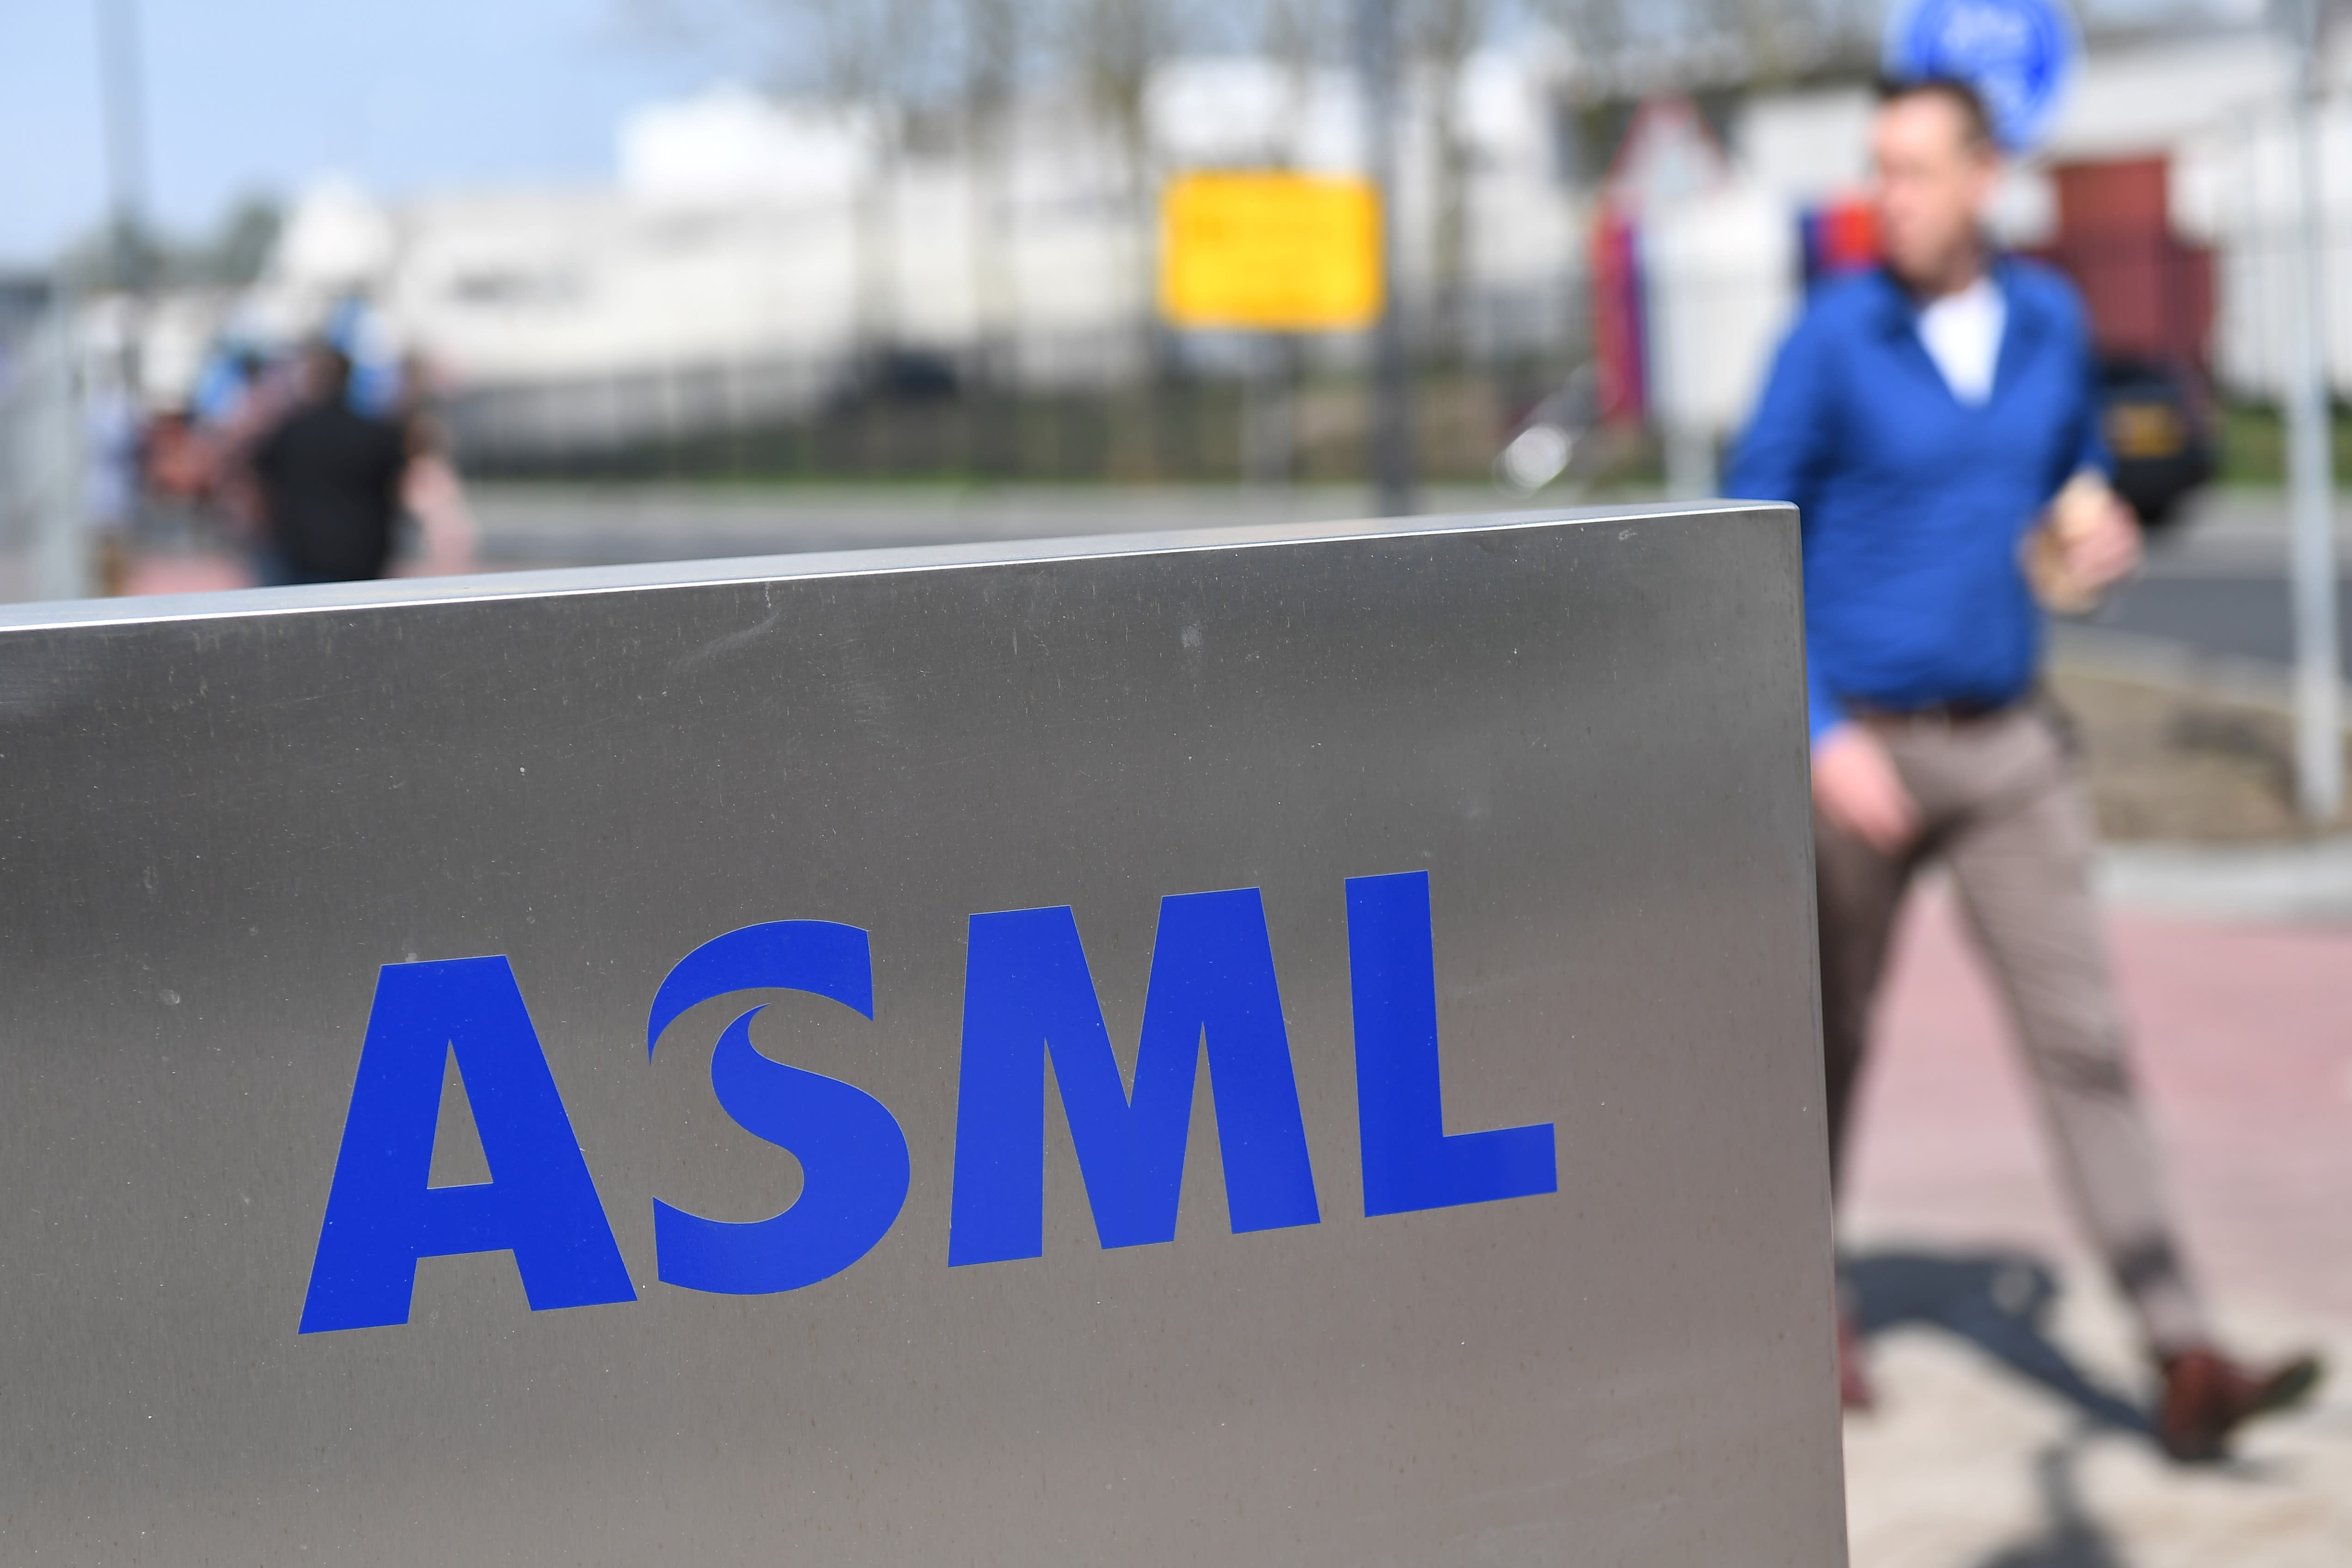 ASML blocked from shipping some of its critical chipmaking tools to China